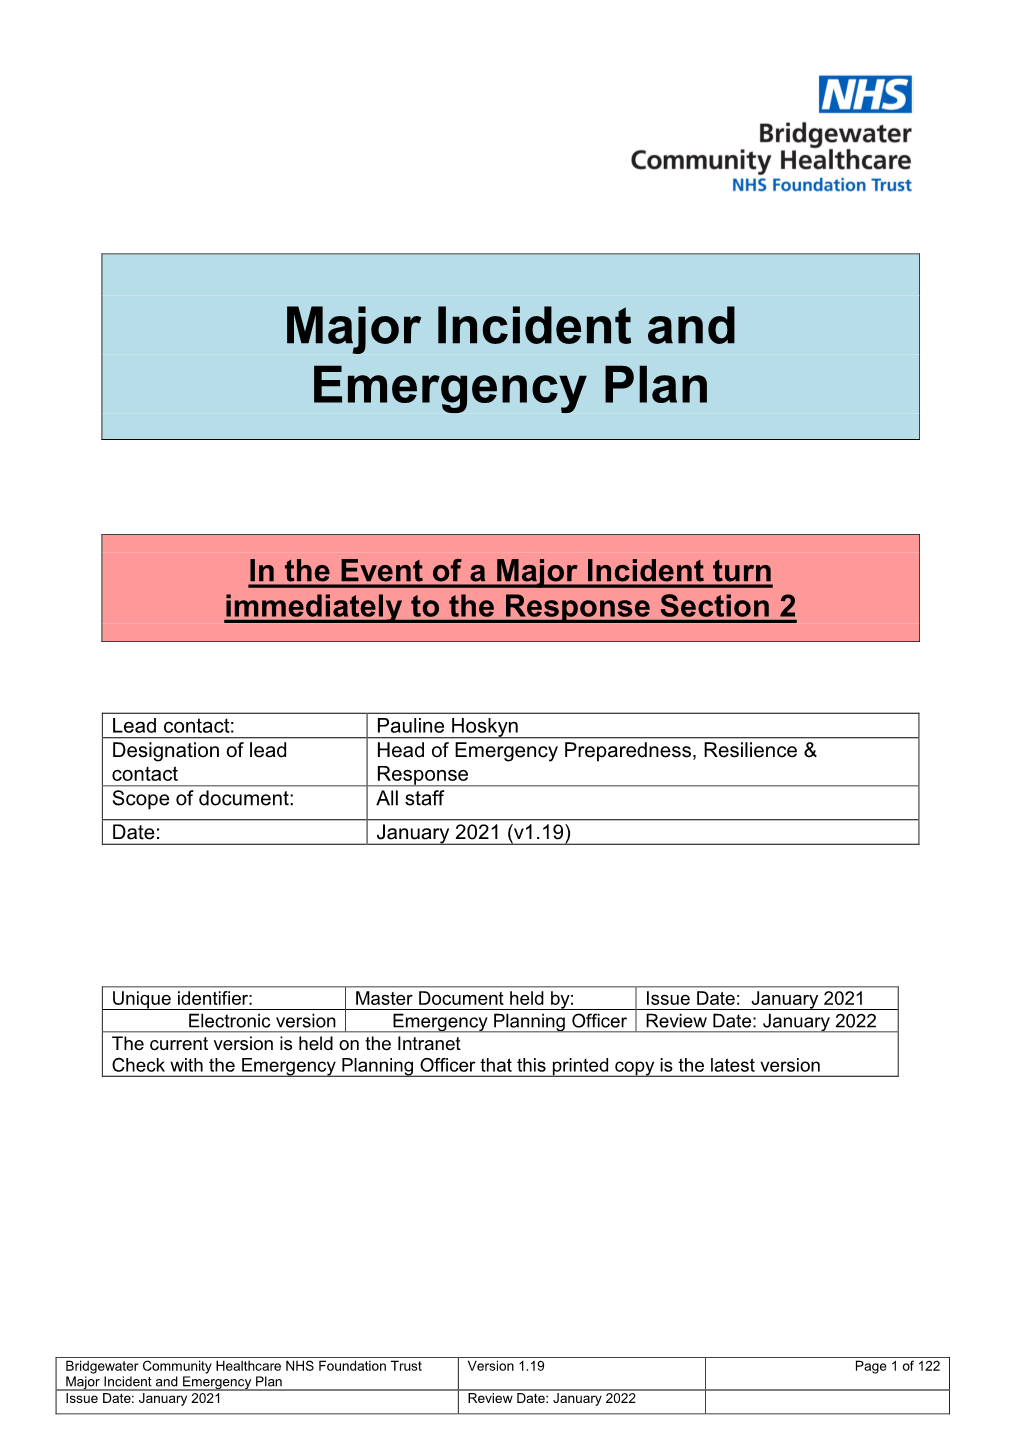 Major Incident and Emergency Plan